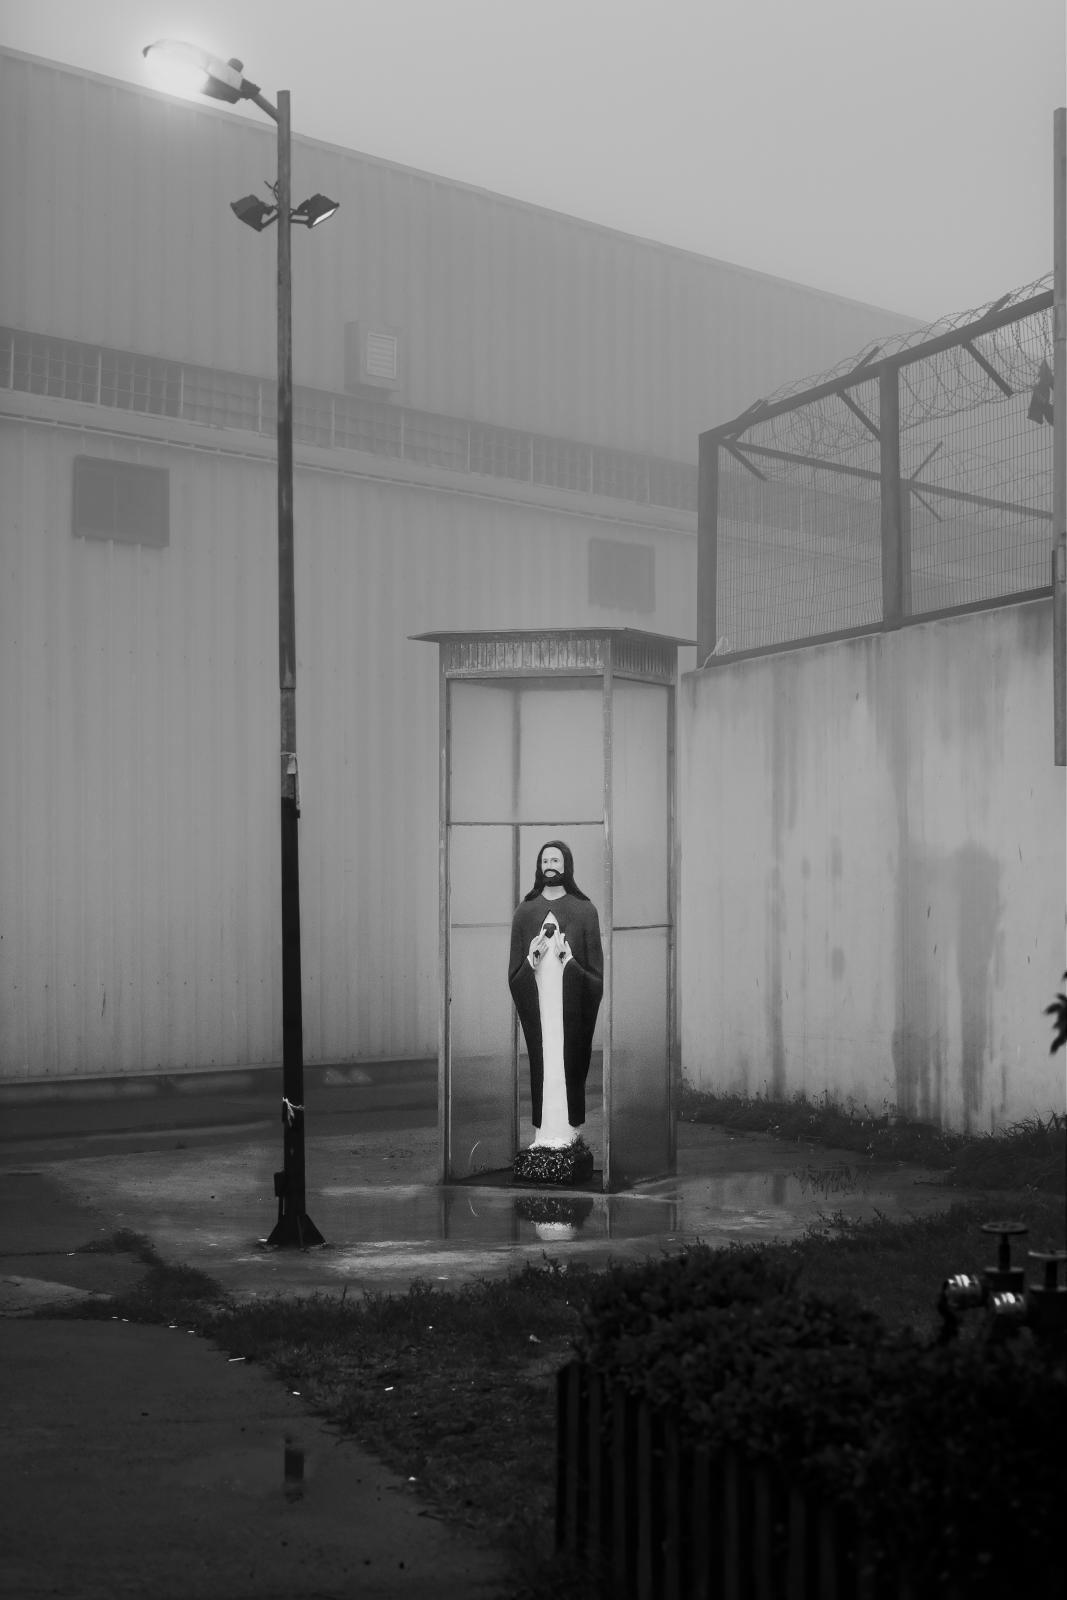 Grid Nº5/Reja Nº5 - A sculpture of Jesus made by inmates stands in a small clearing of light between the walls of the...